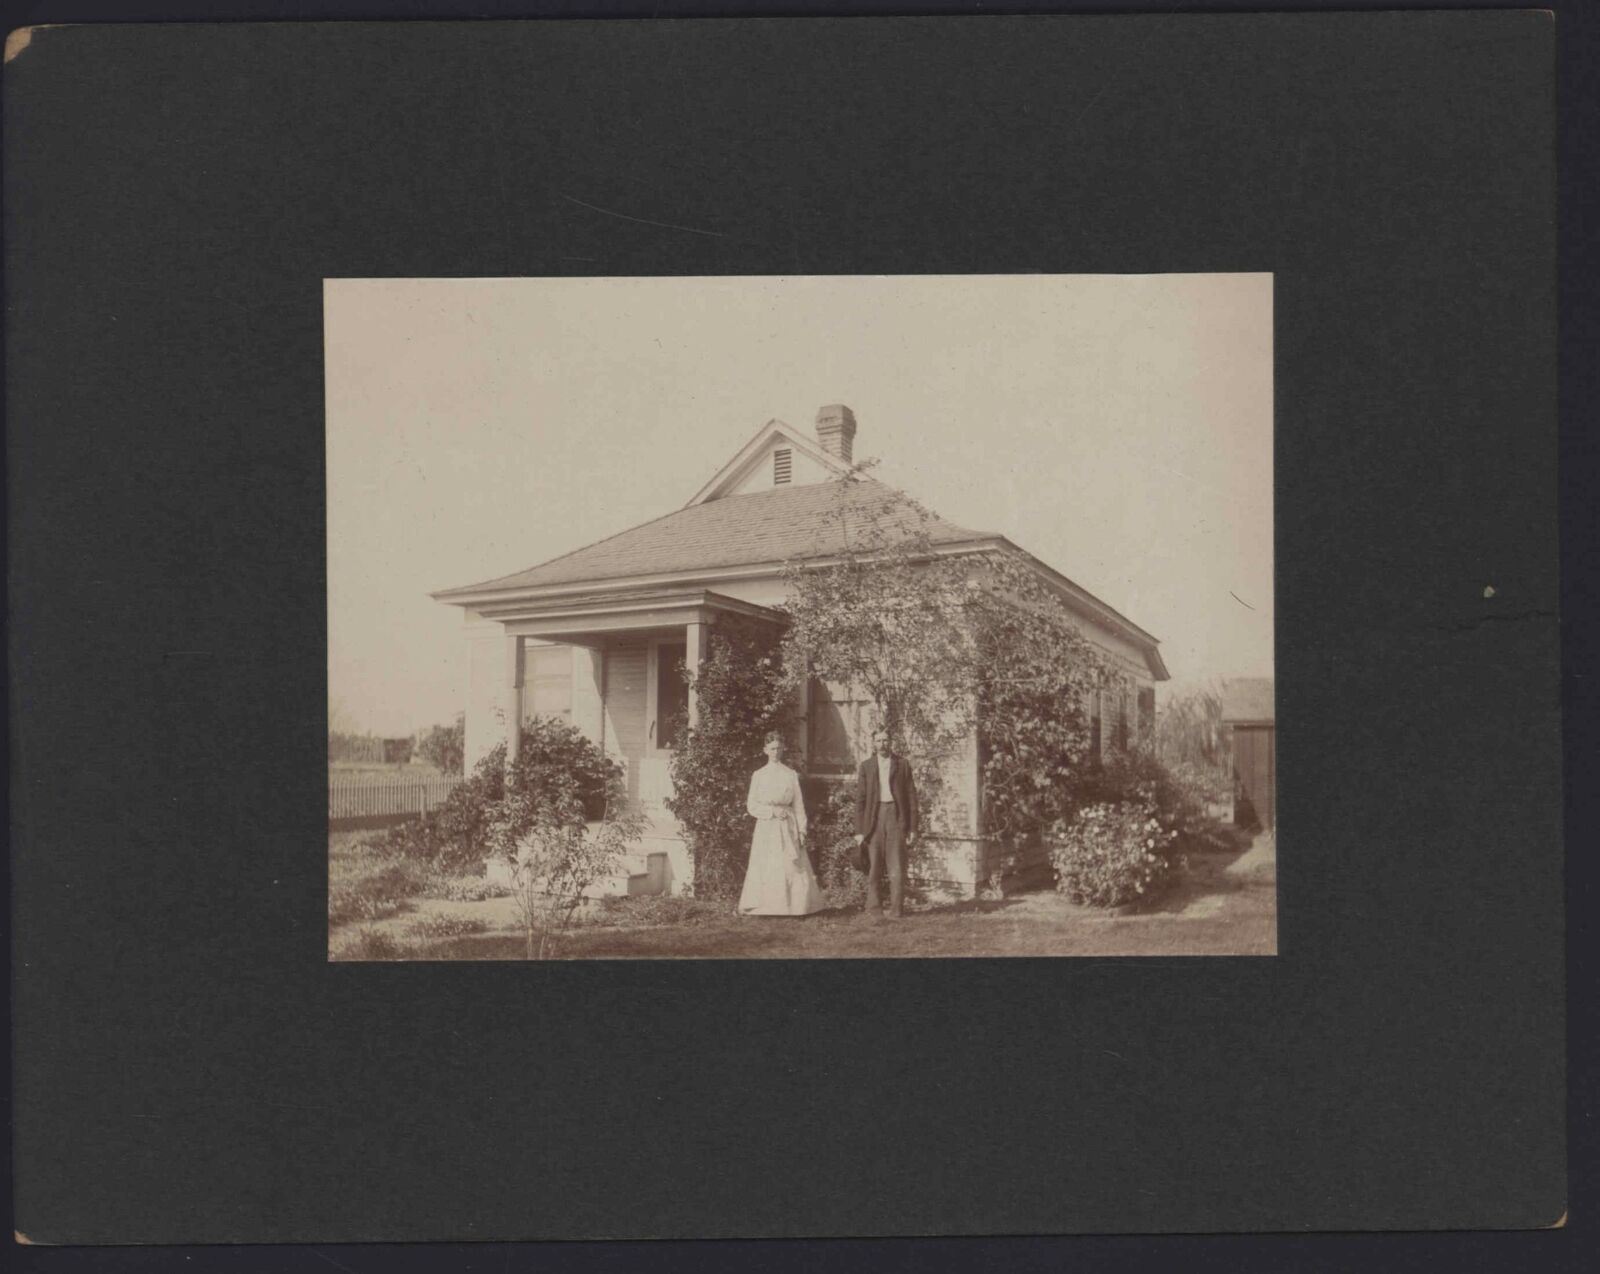 CABINET CARD PHOTO * Couple standing in front of House no names no location 7x9